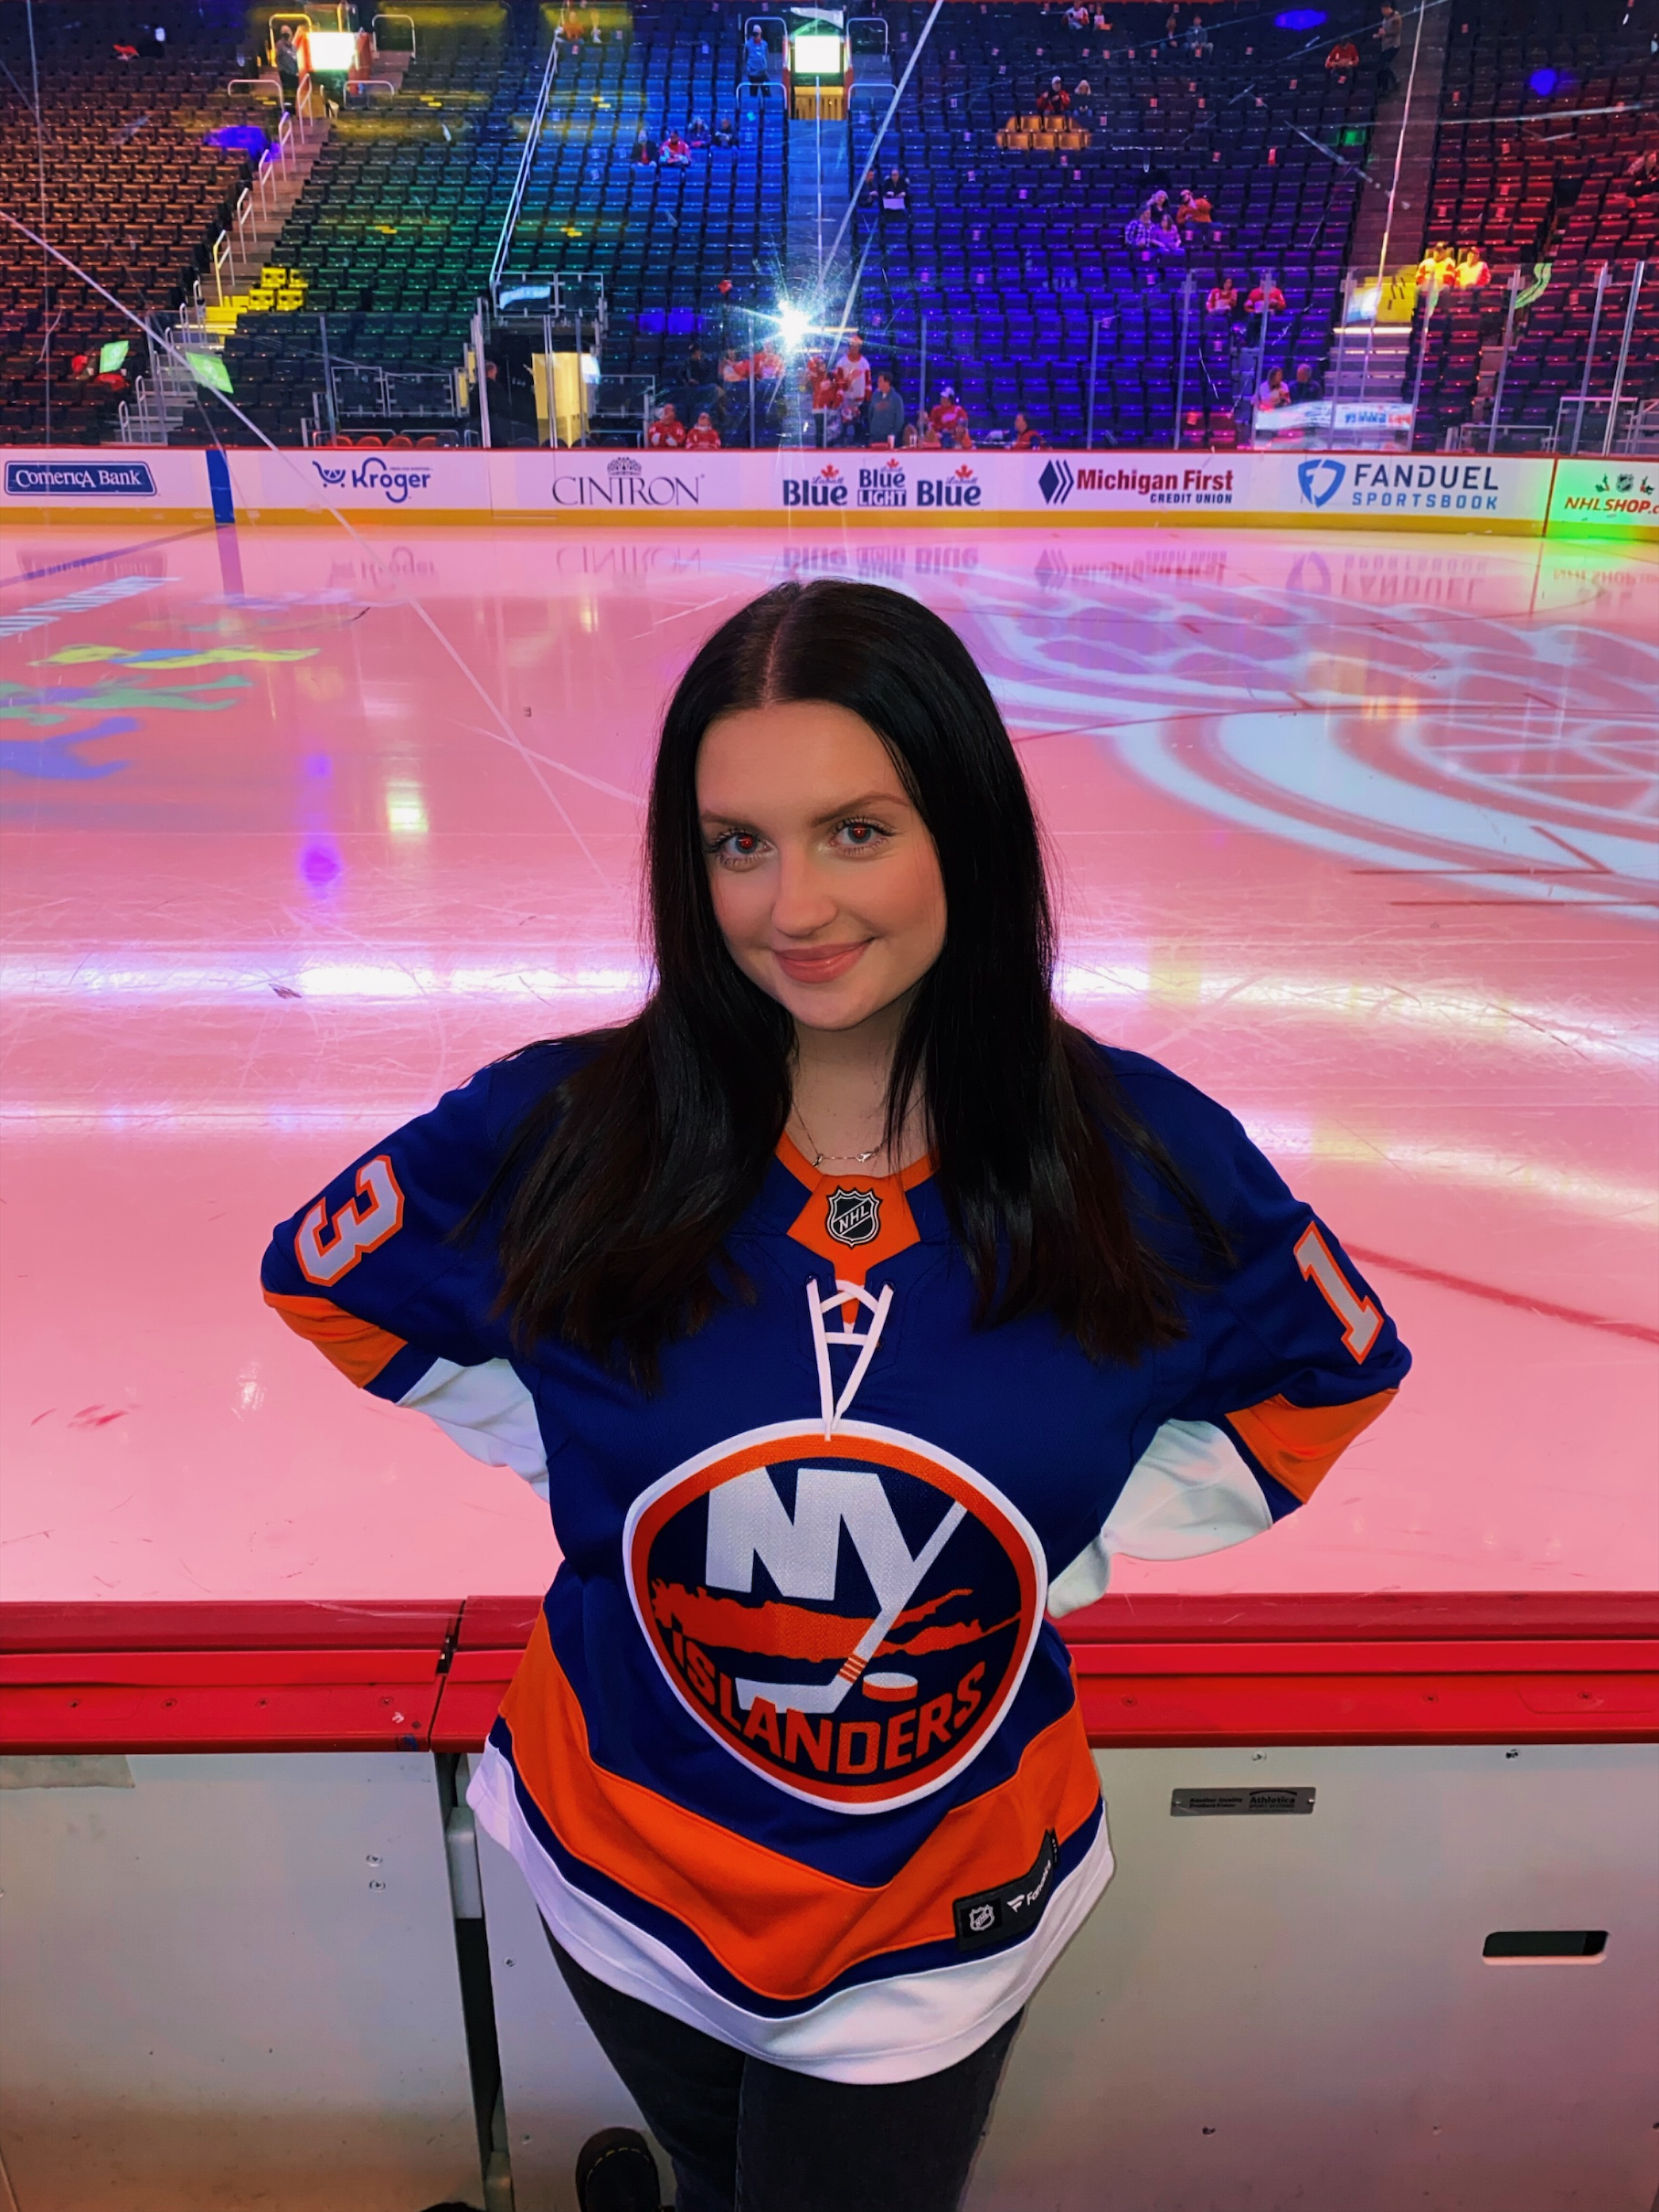 Woman in hockey jersey stands in front of ice rink